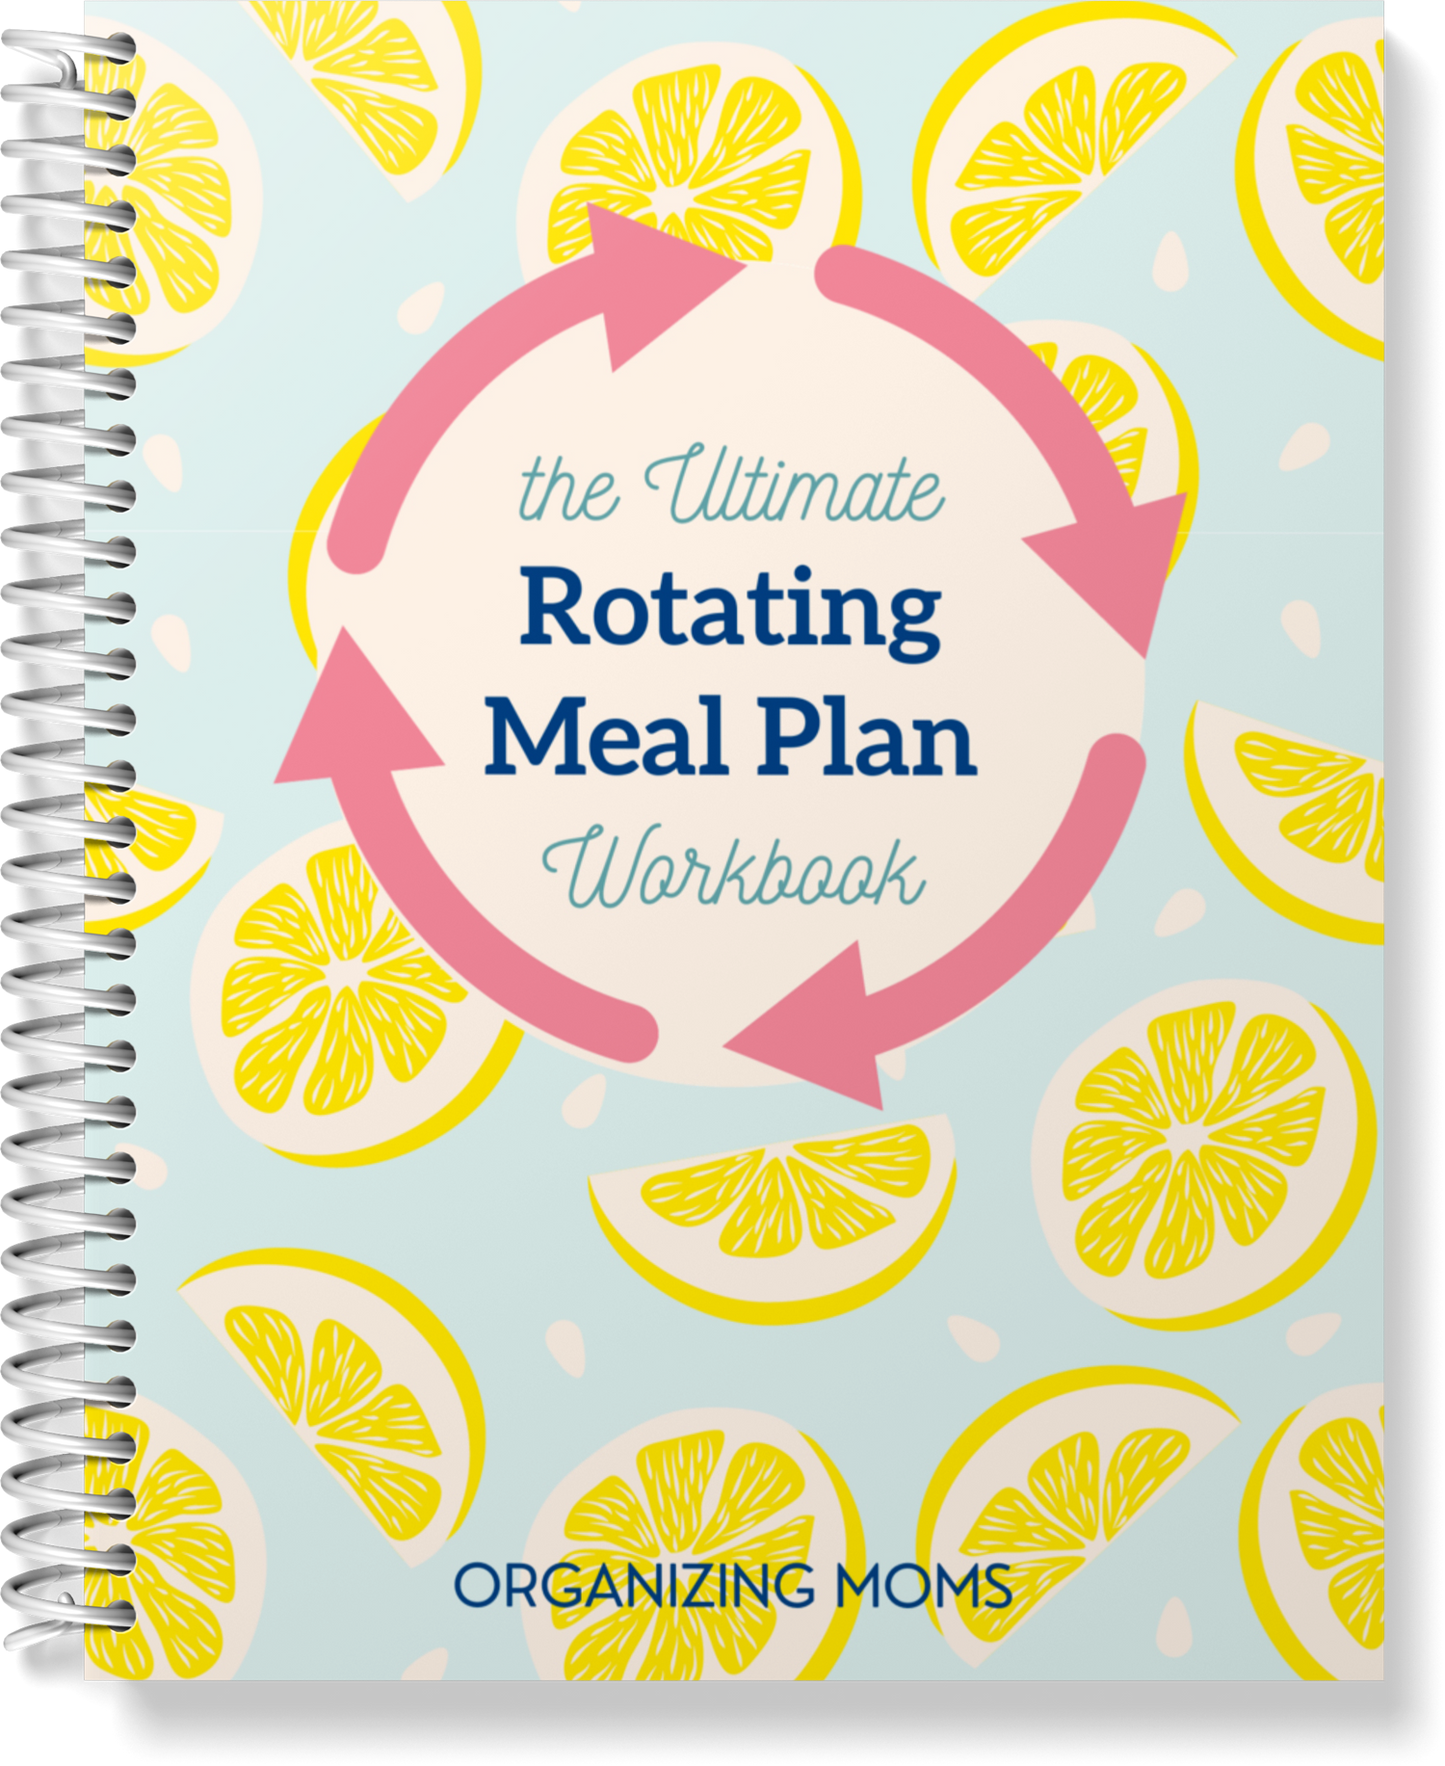 Image of The Ultimate Rotating Meal Plan Workbook cover on spiral notebook